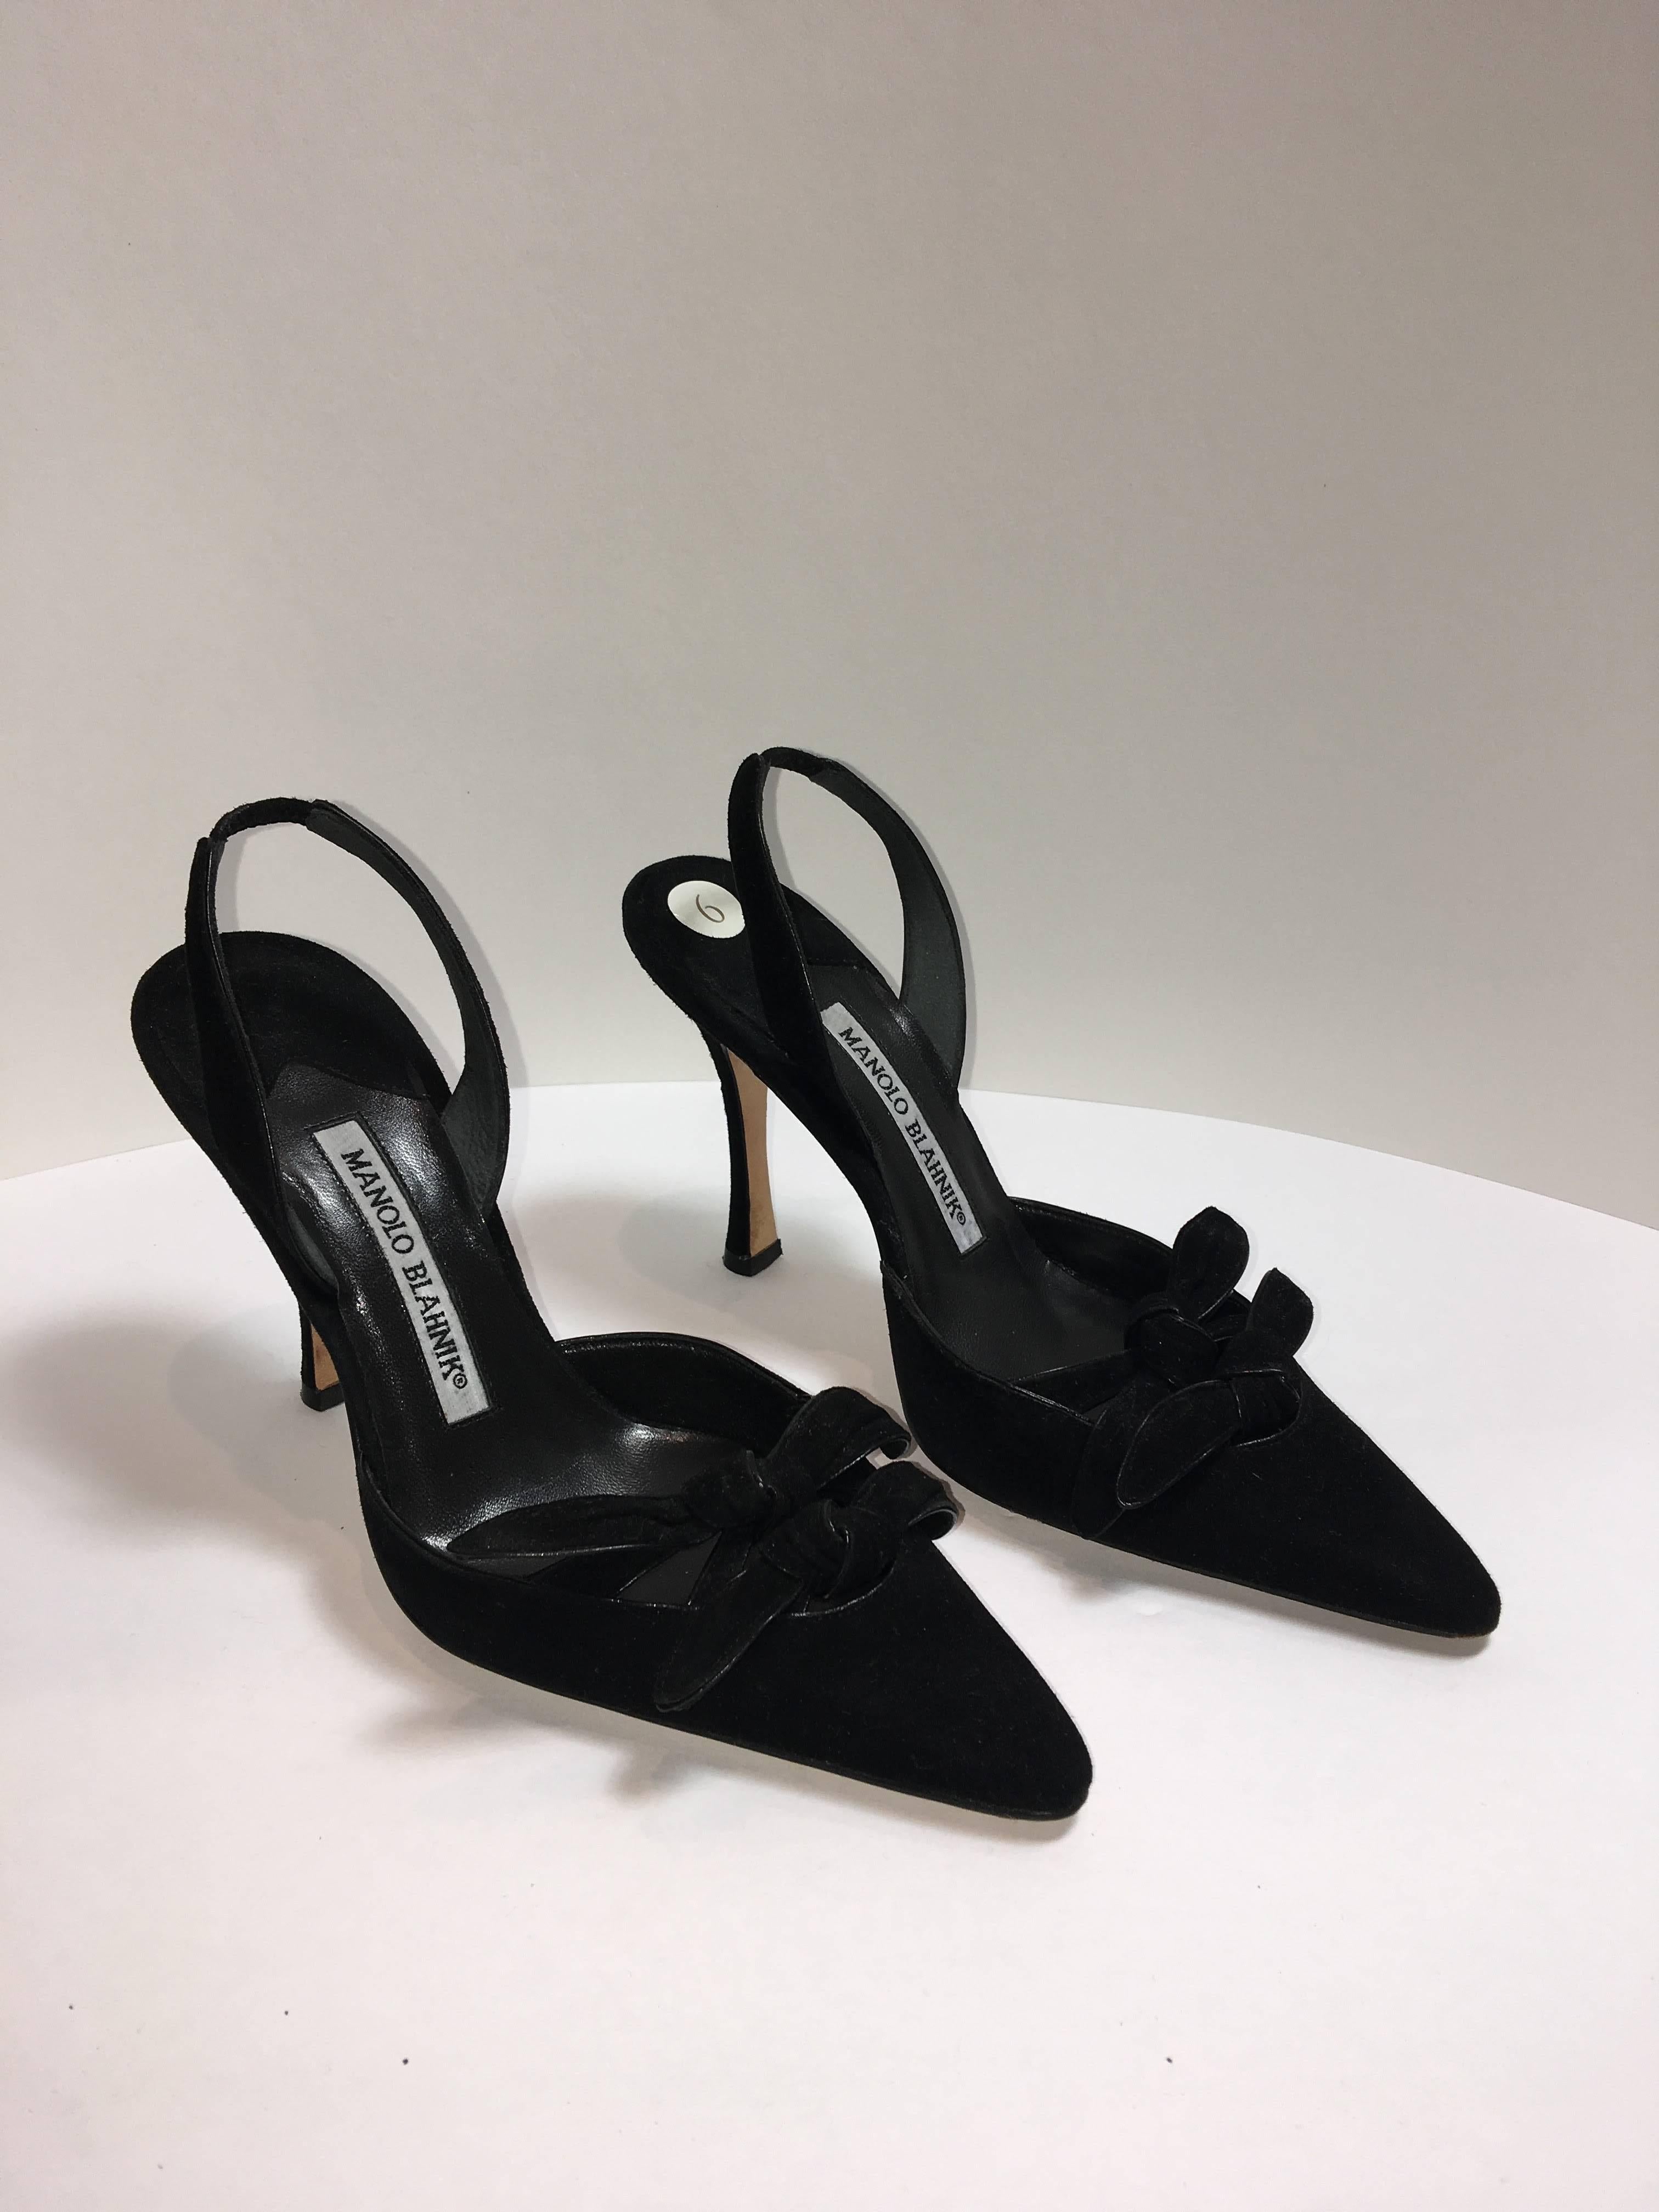 Manolo Blahnik Double knotted Sling backs. Black suede with pointed toe, made in Italy. 